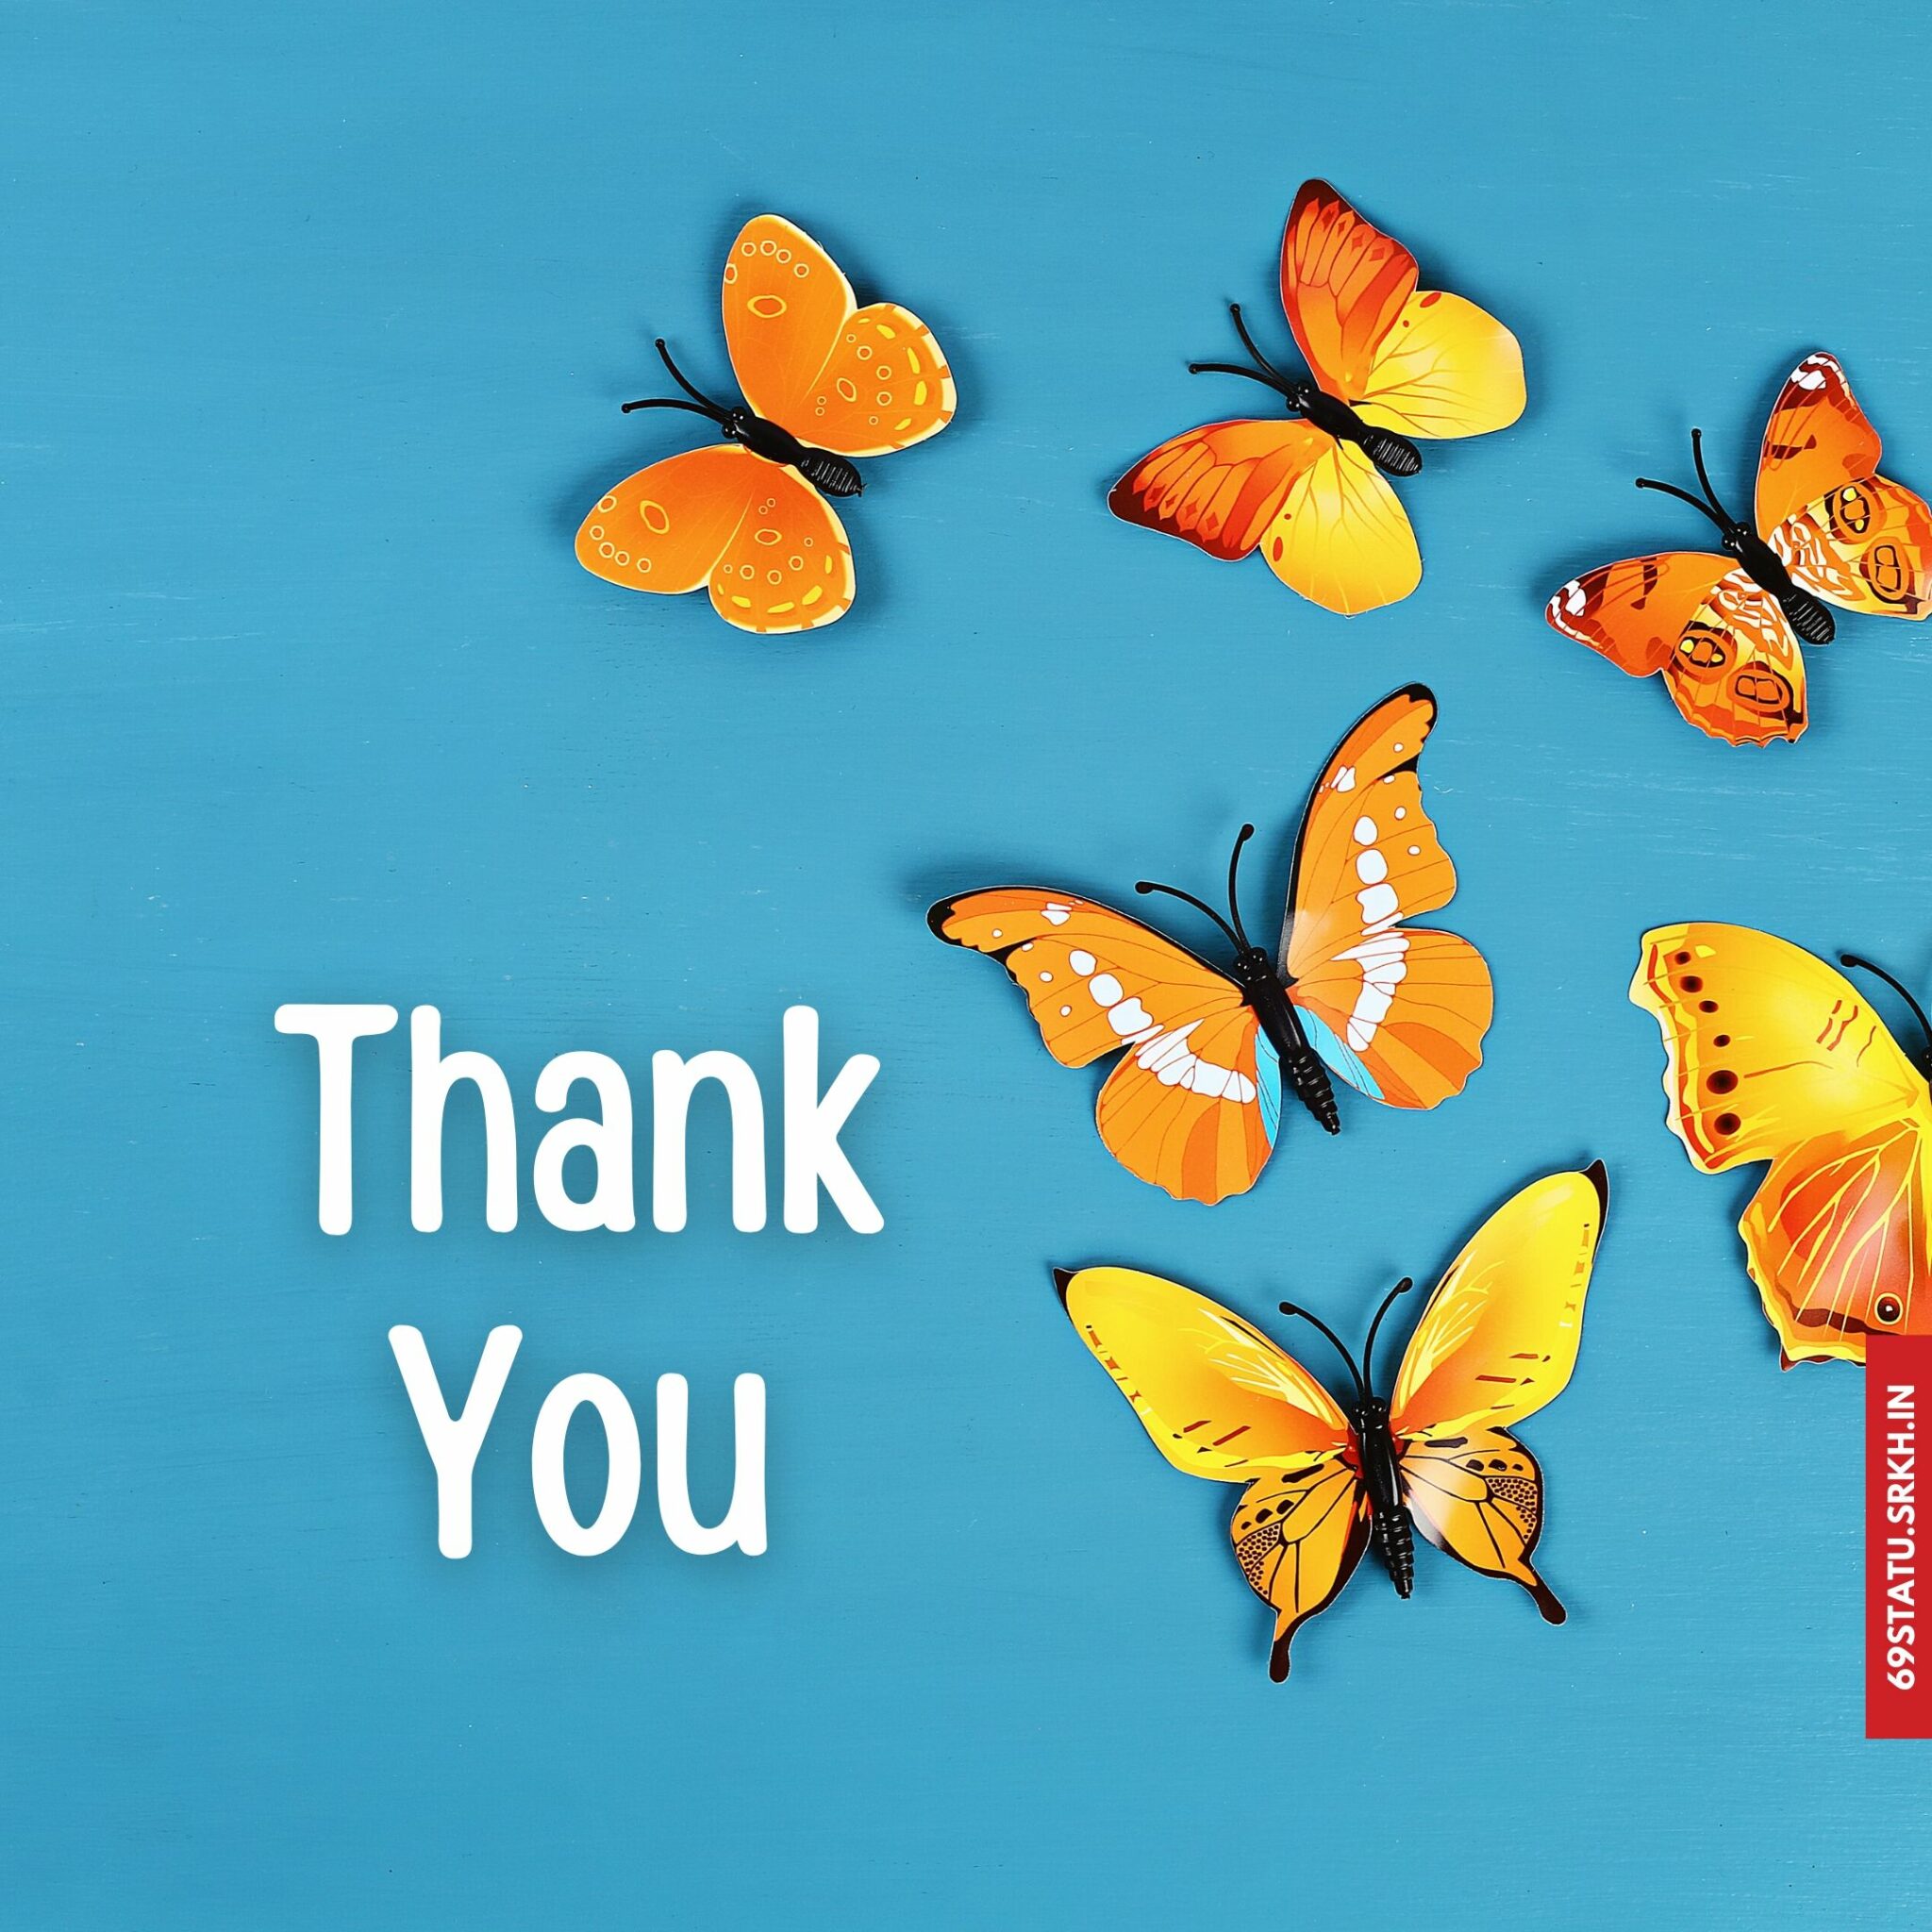 Thank You Images with Butterflies HD